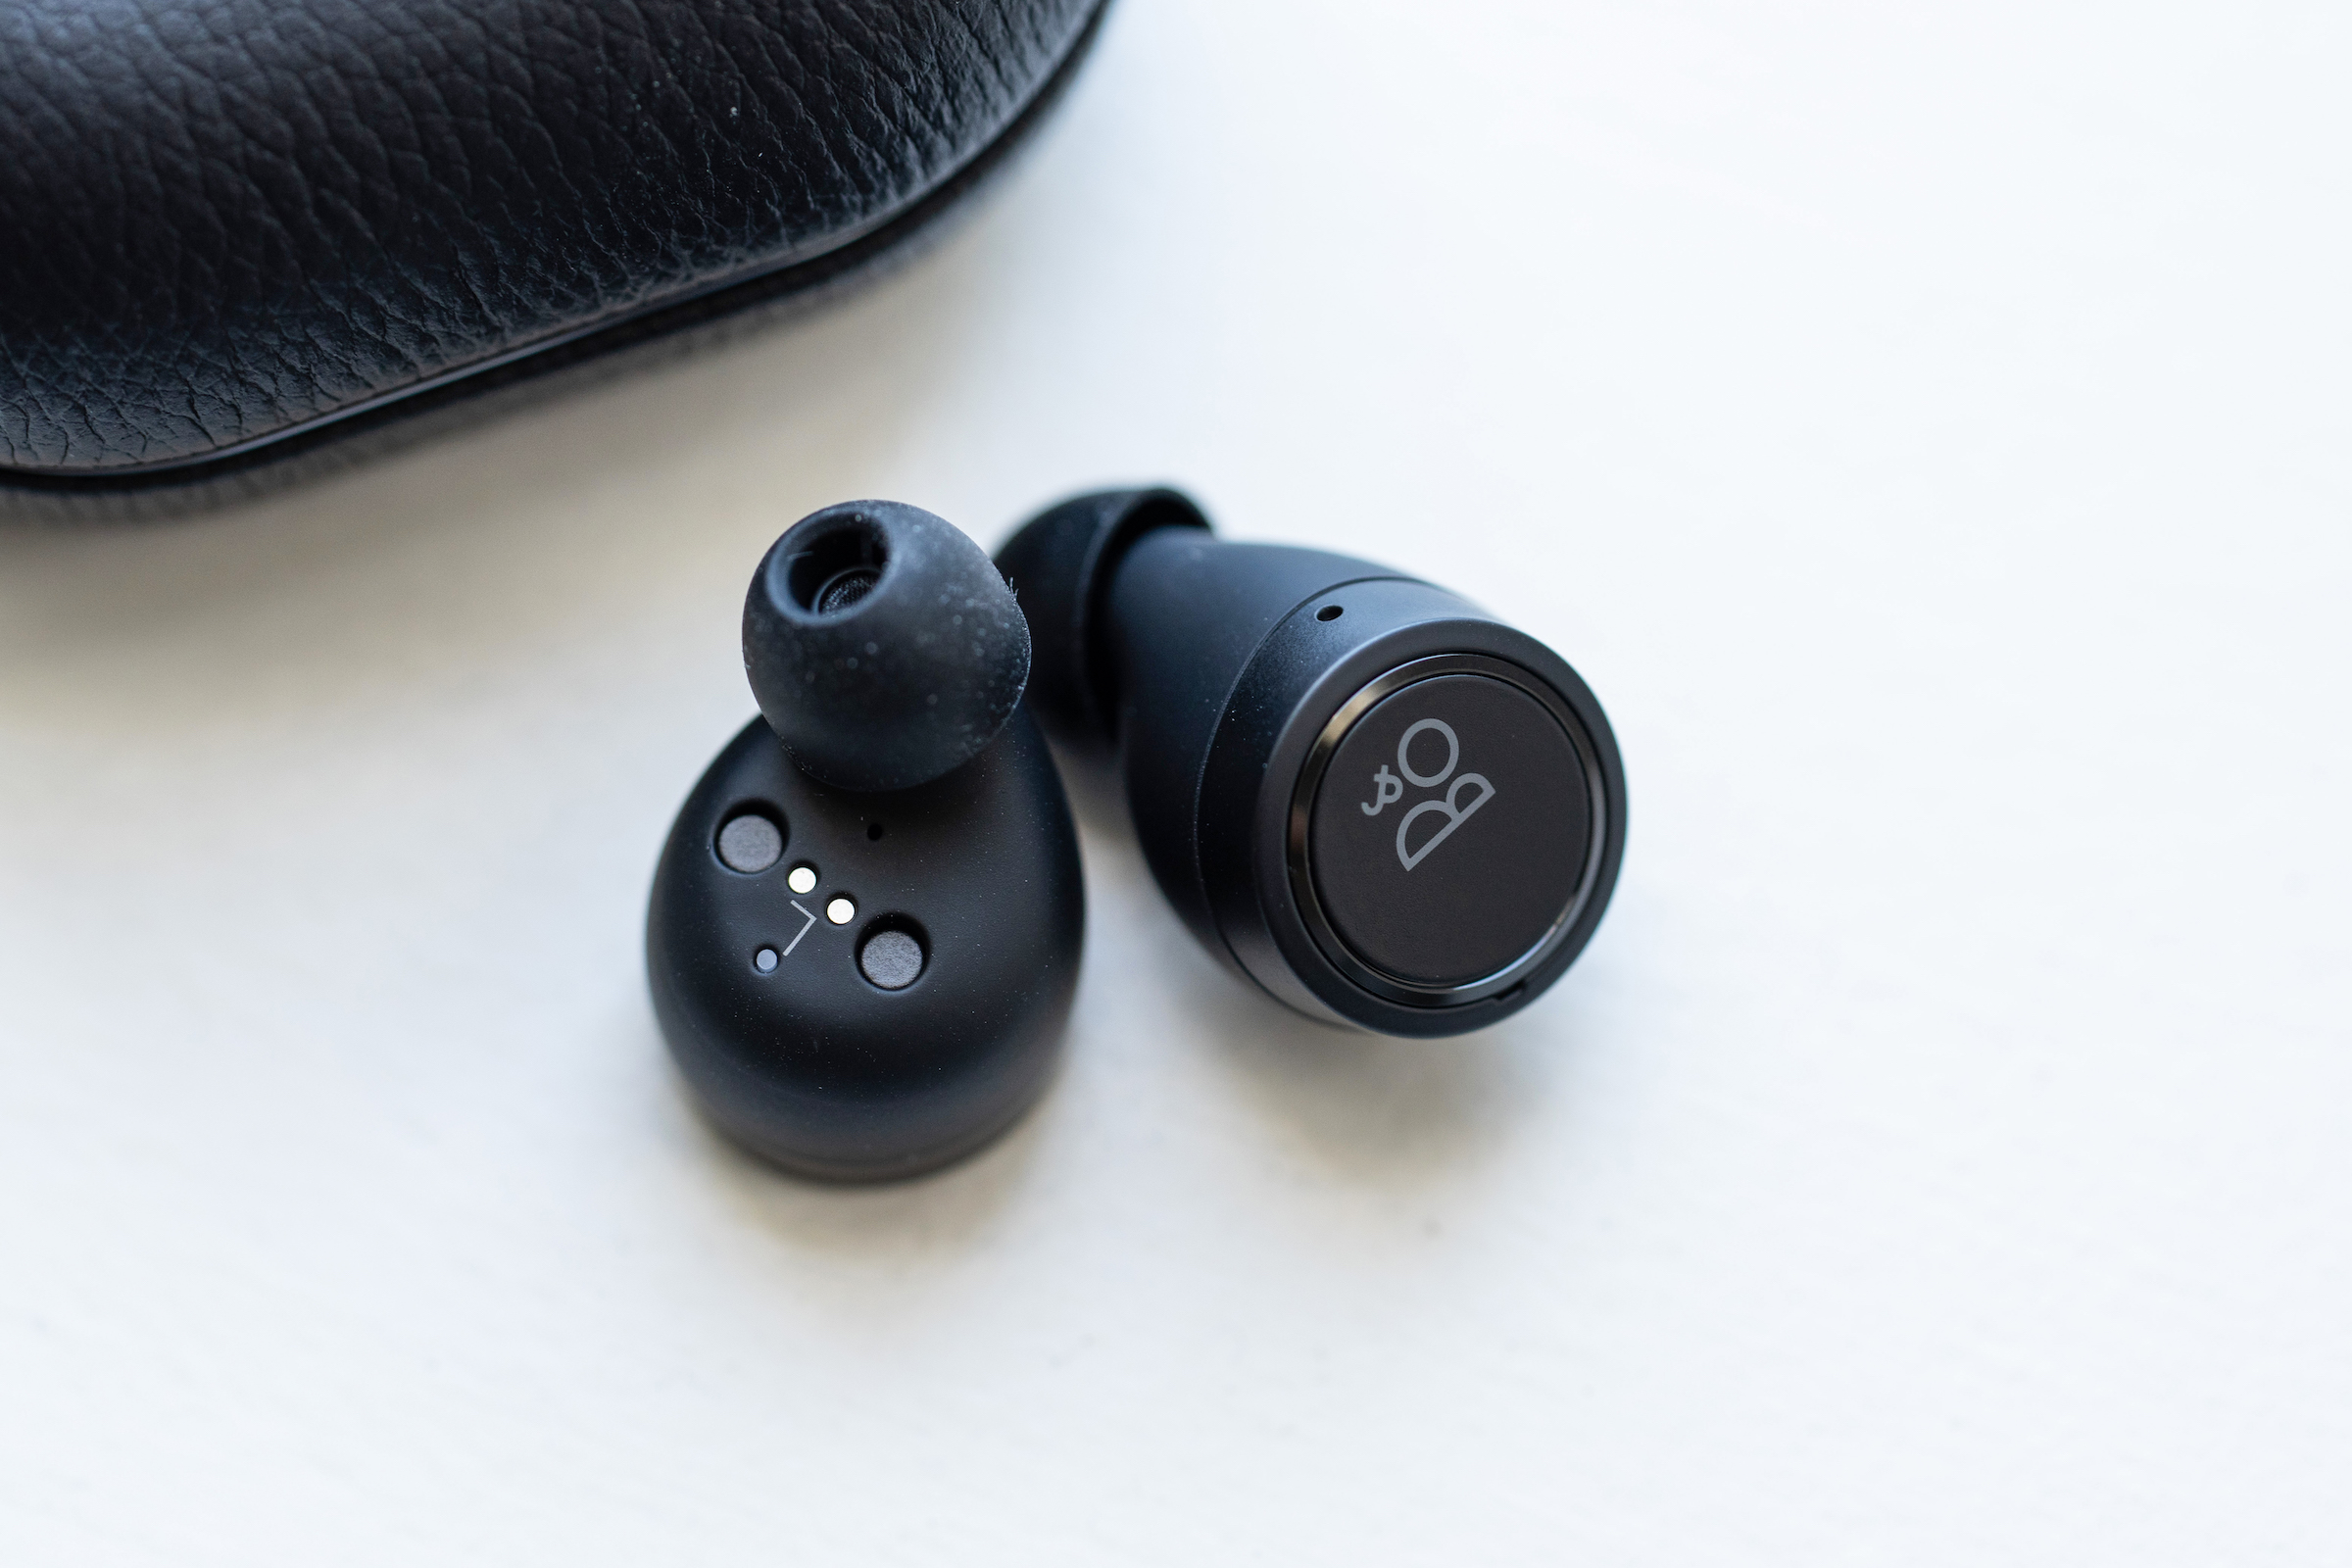 Bang & Olufsen’s latest Beoplay E8 fully wireless earbuds offer top sound and comfort